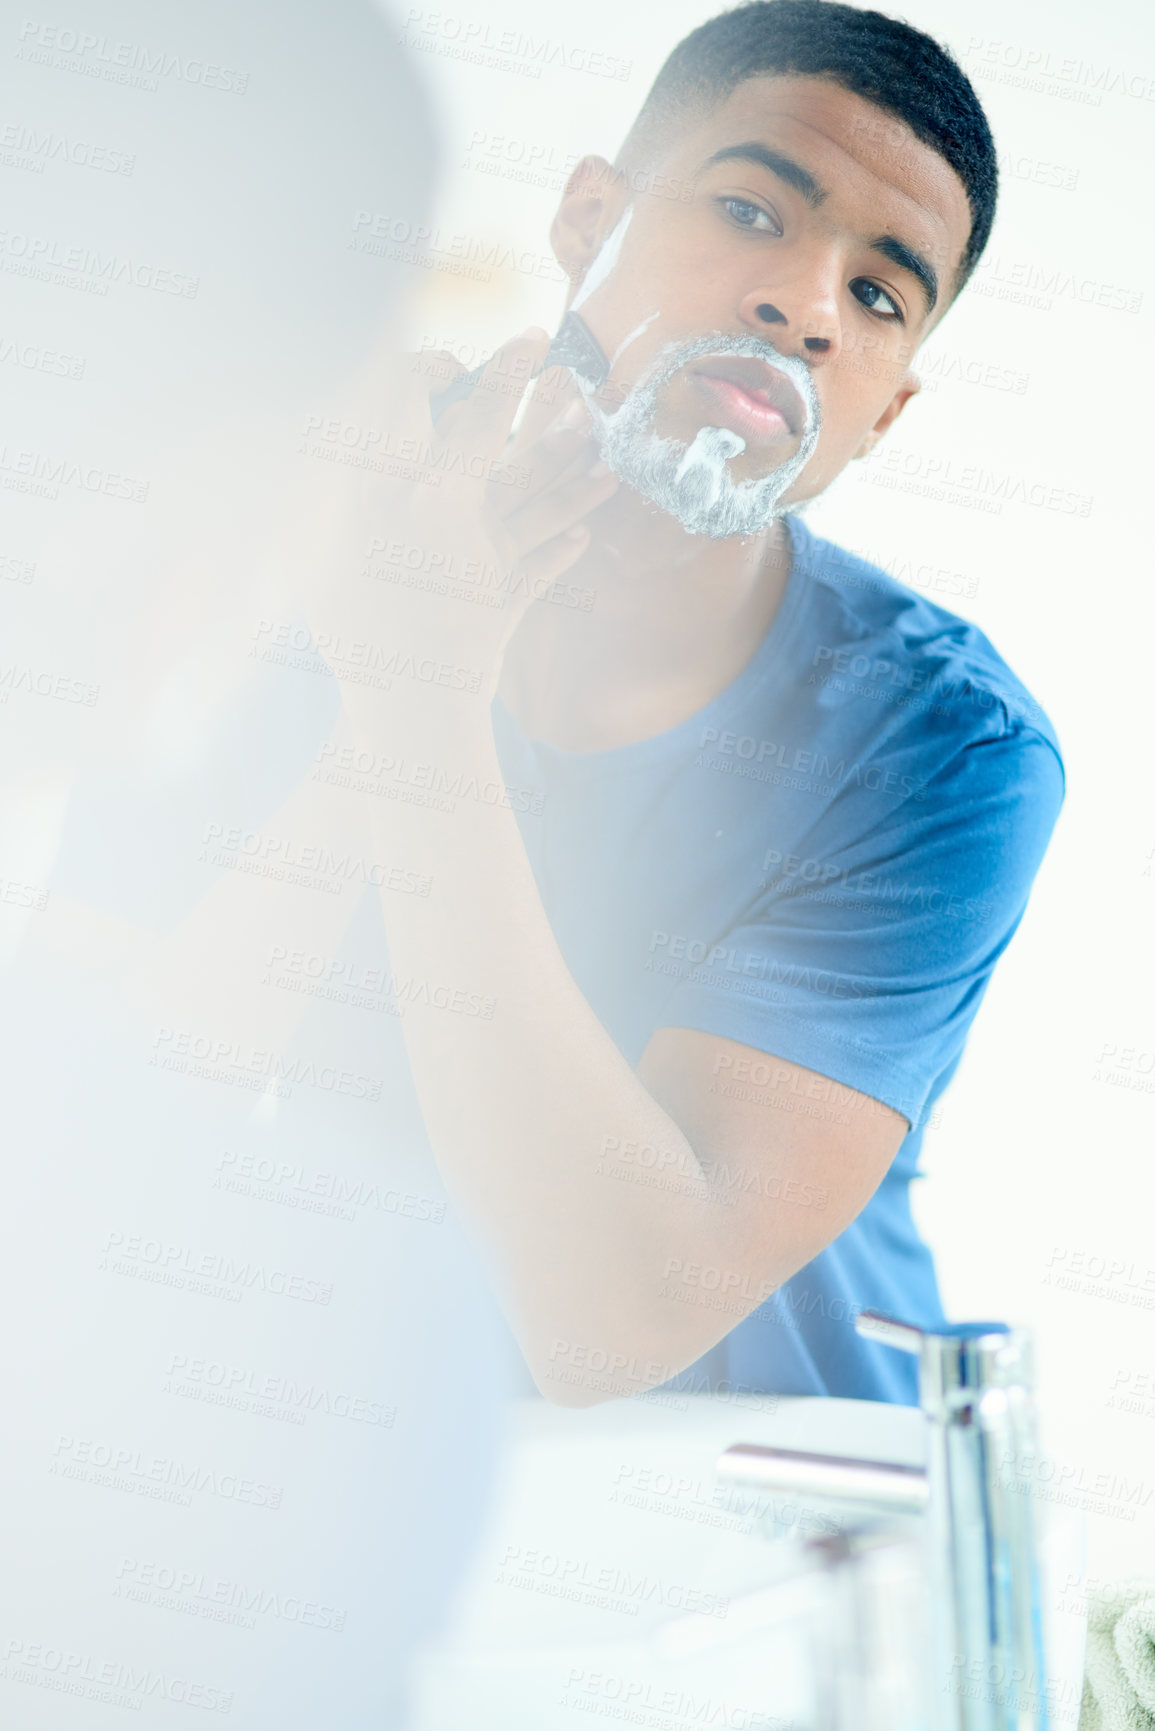 Buy stock photo Shot of young man shaving his face in his bathroom mirror